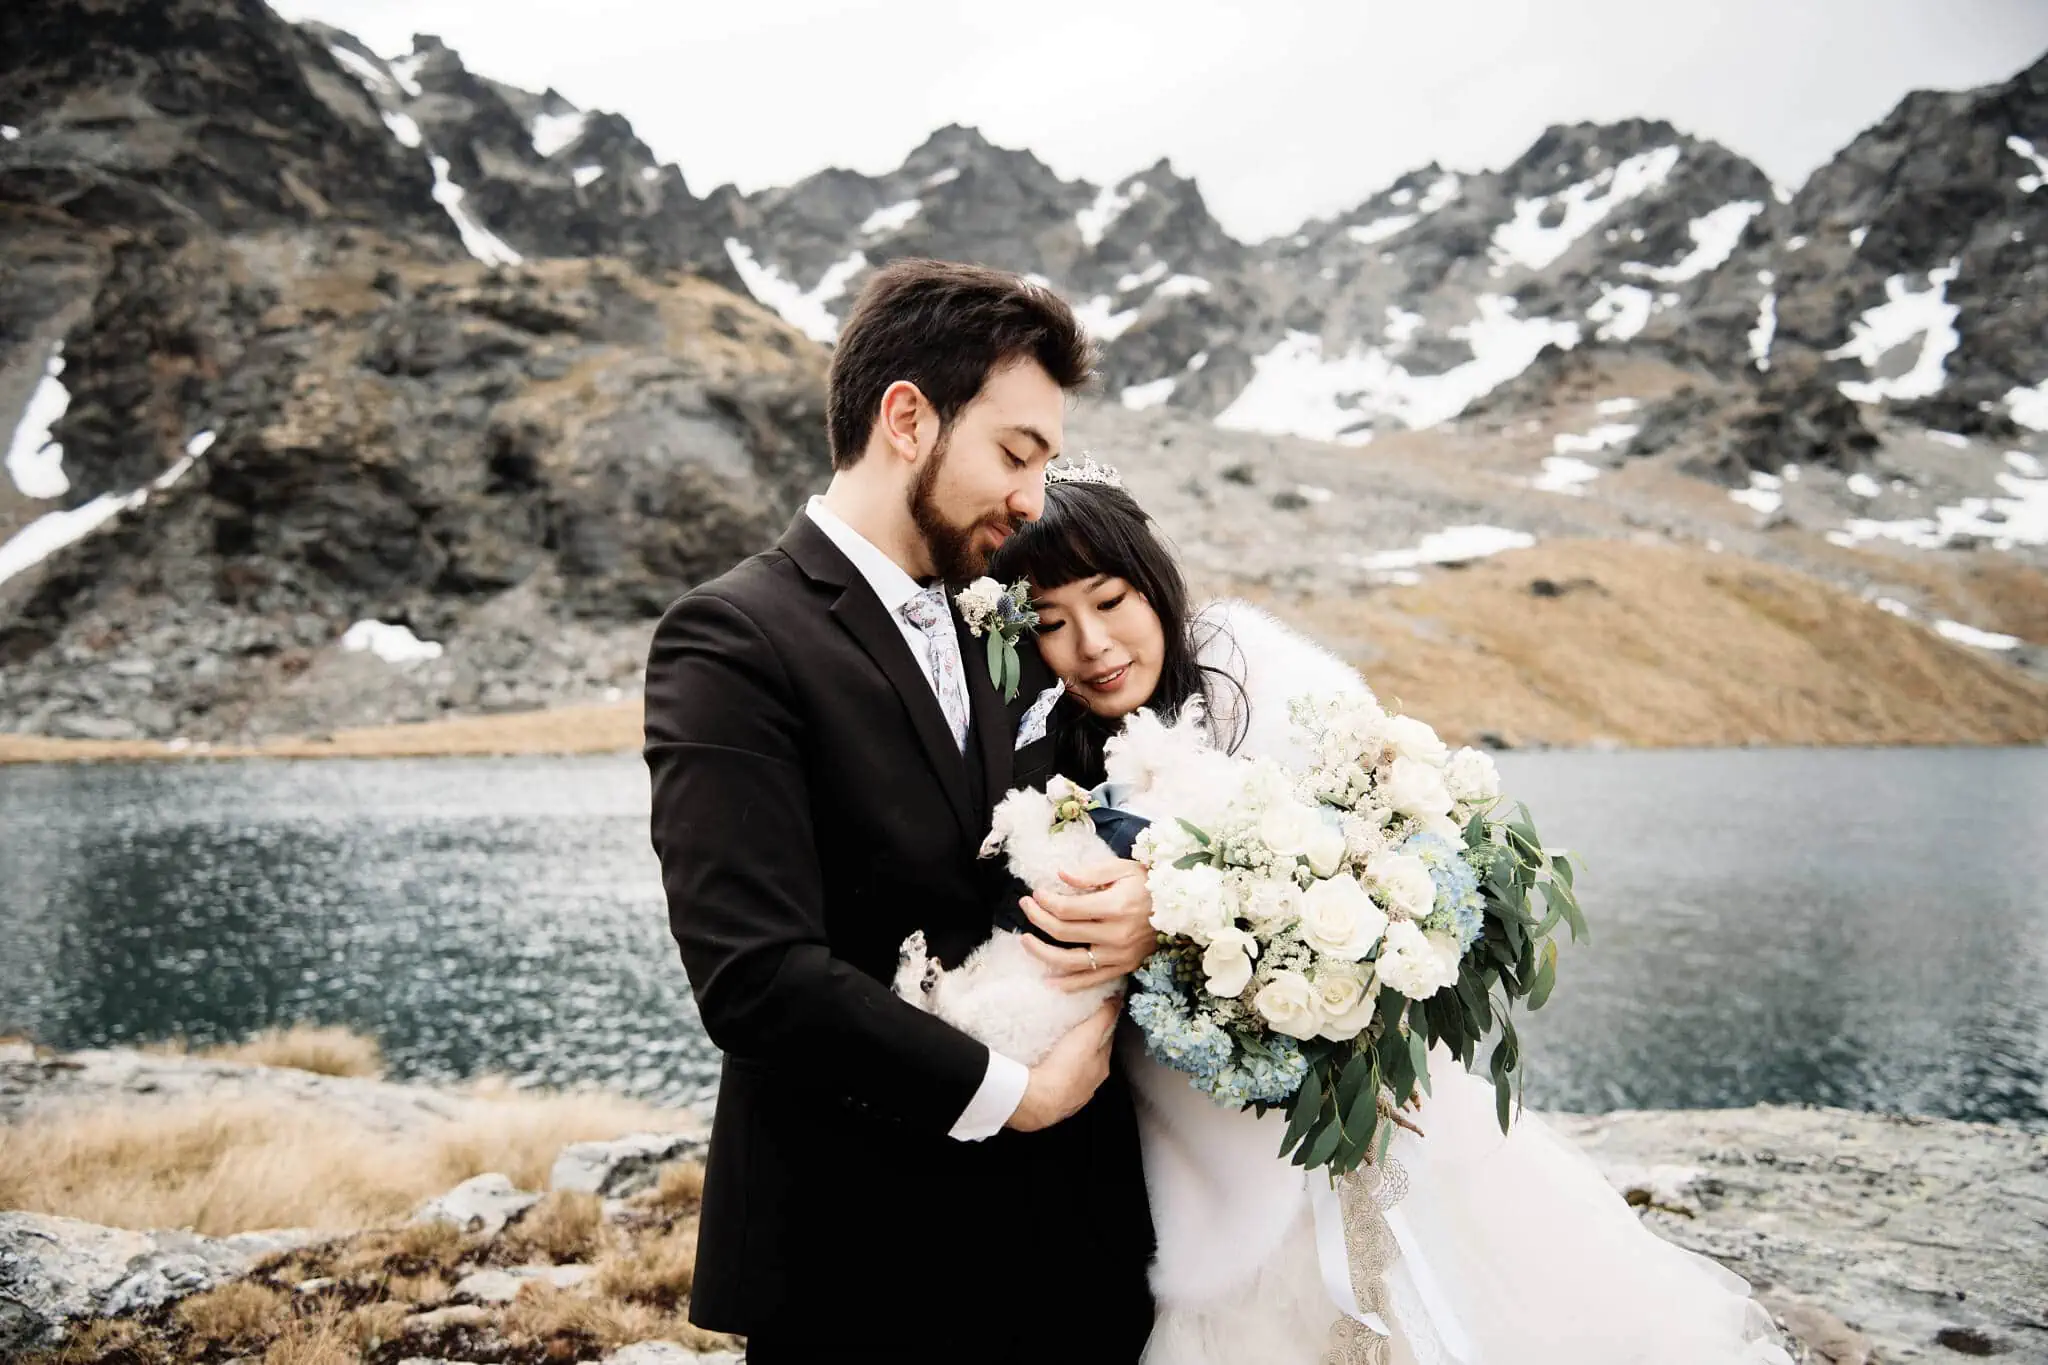 Carlos and Wanzhu's intimate wedding elopement, holding their dog in front of a lake in the mountains at Cecil Peak.